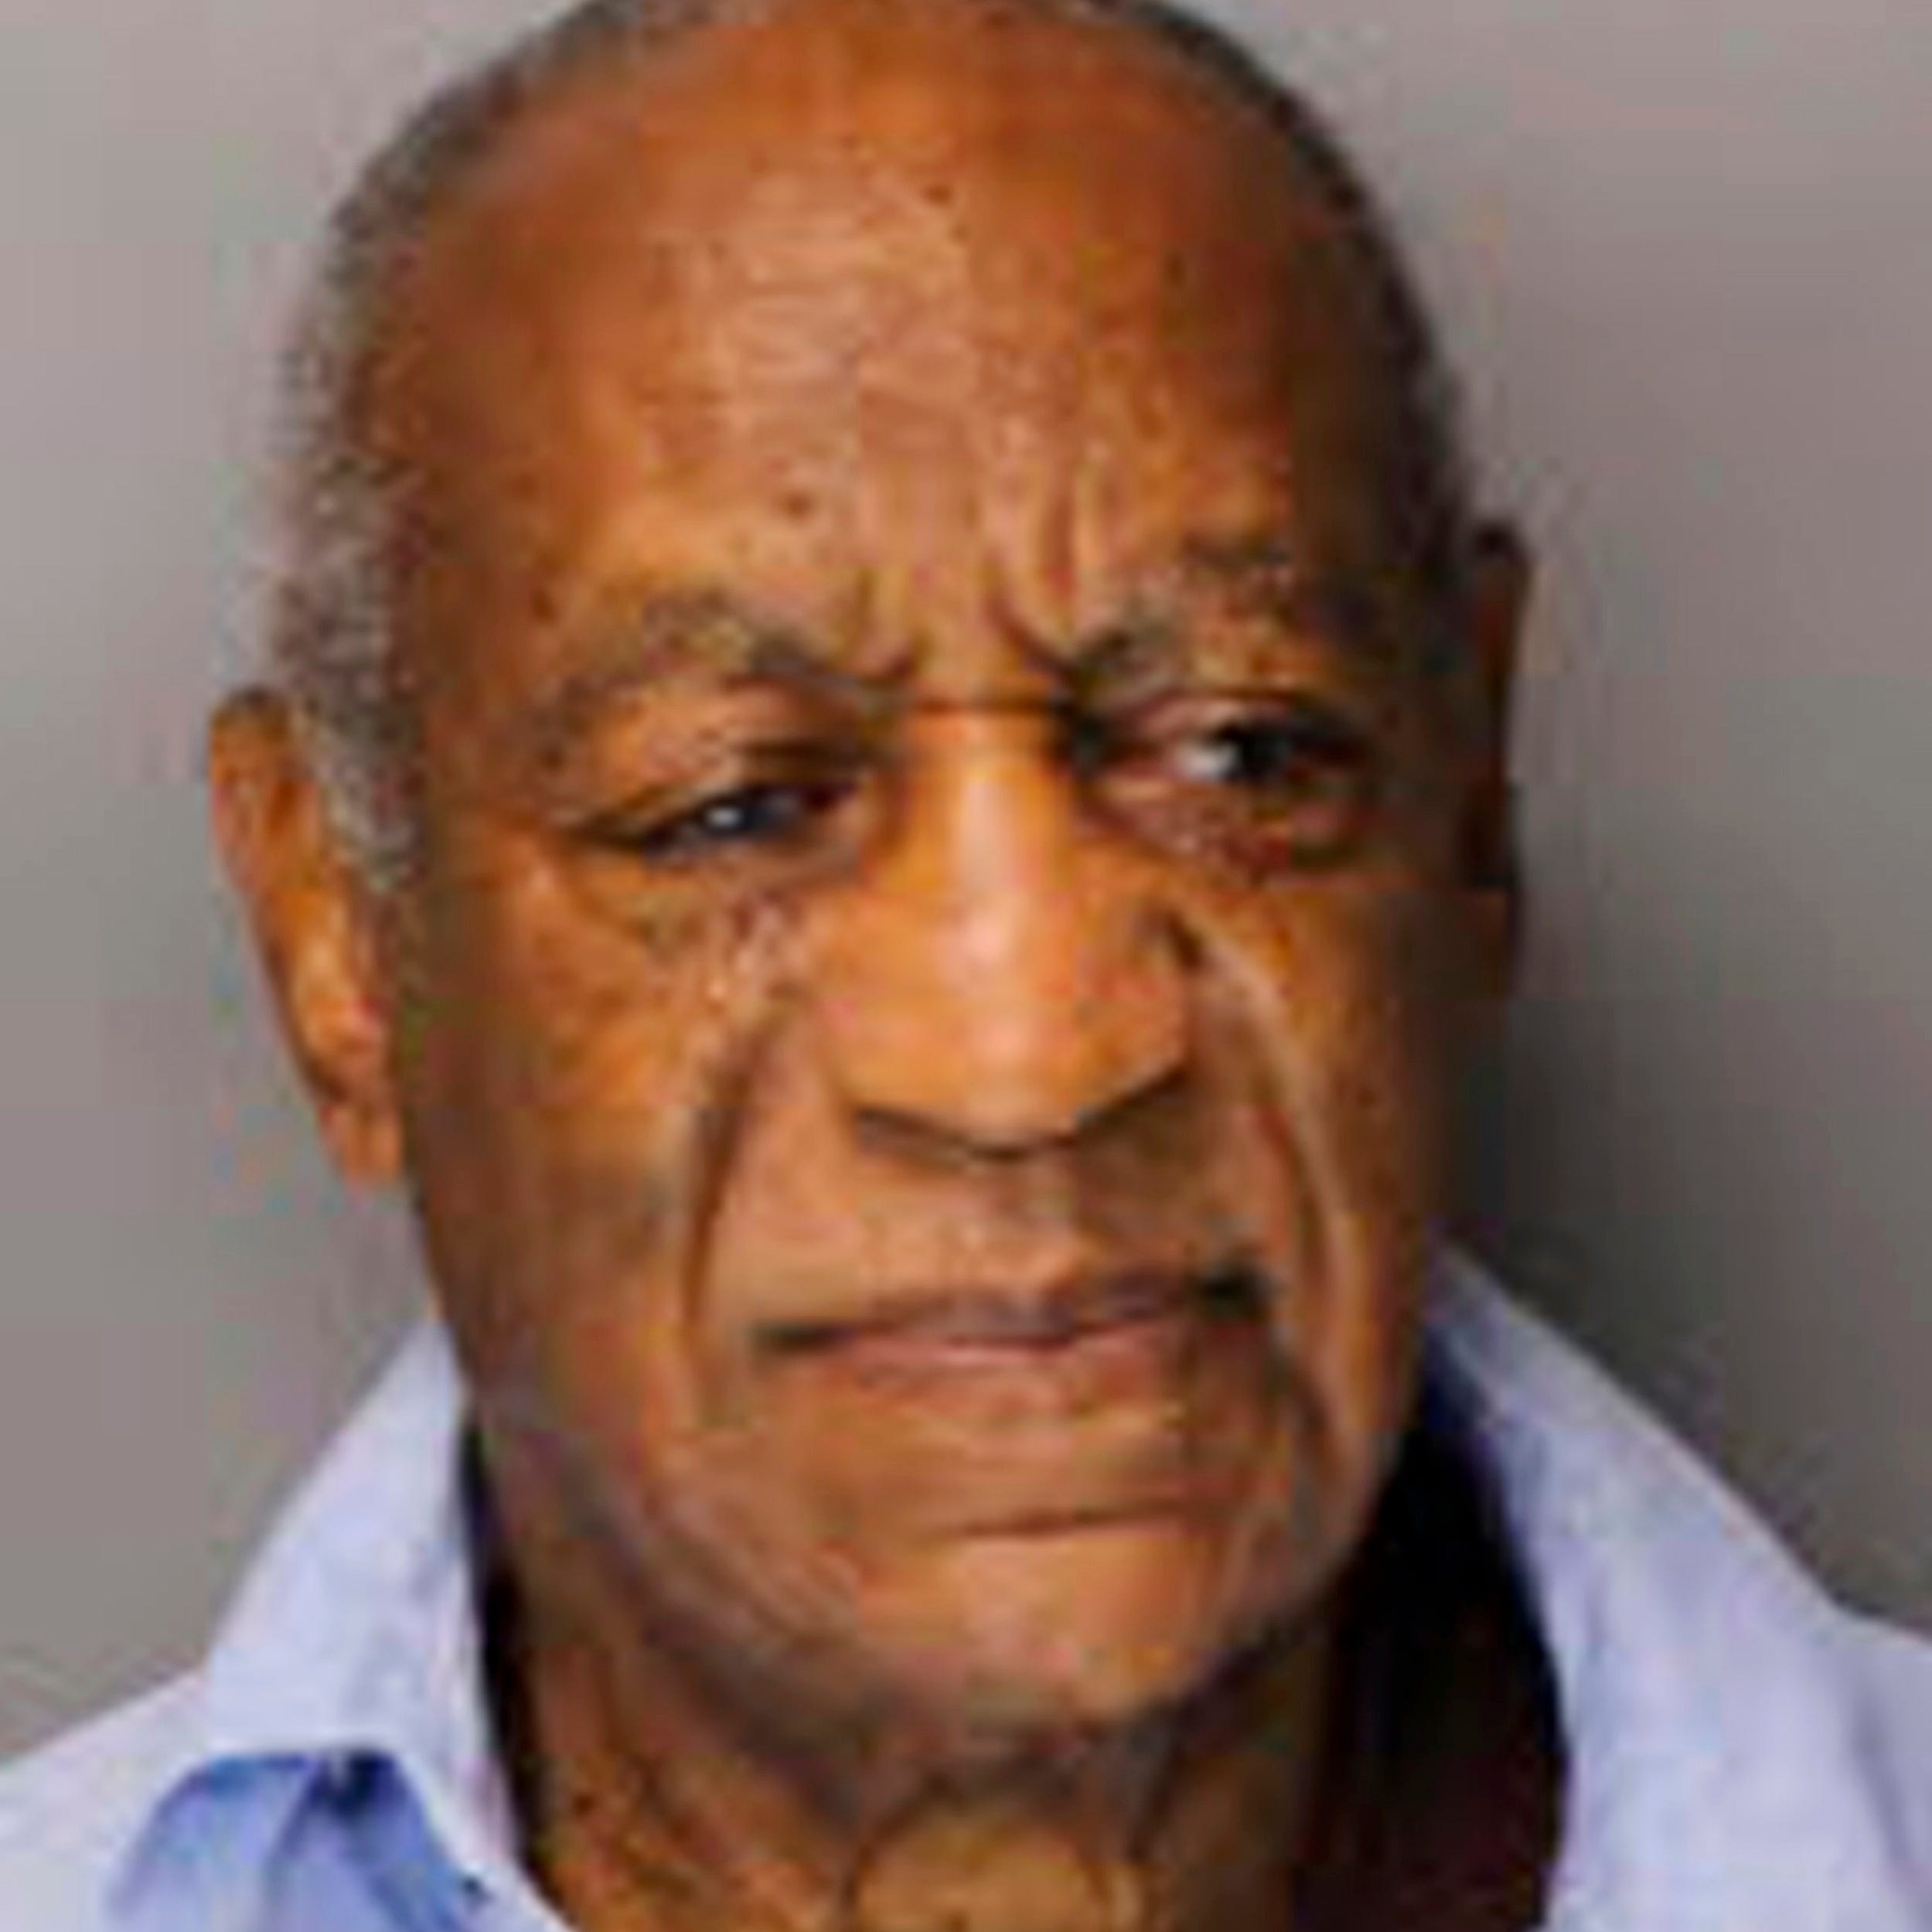 Bill Cosby is seen in his first prisoner photo Tuesday evening after he was sentenced to serve three to 10 years at SCI Phoenix, a new Pennsylvania state prison outside of Philadelphia.